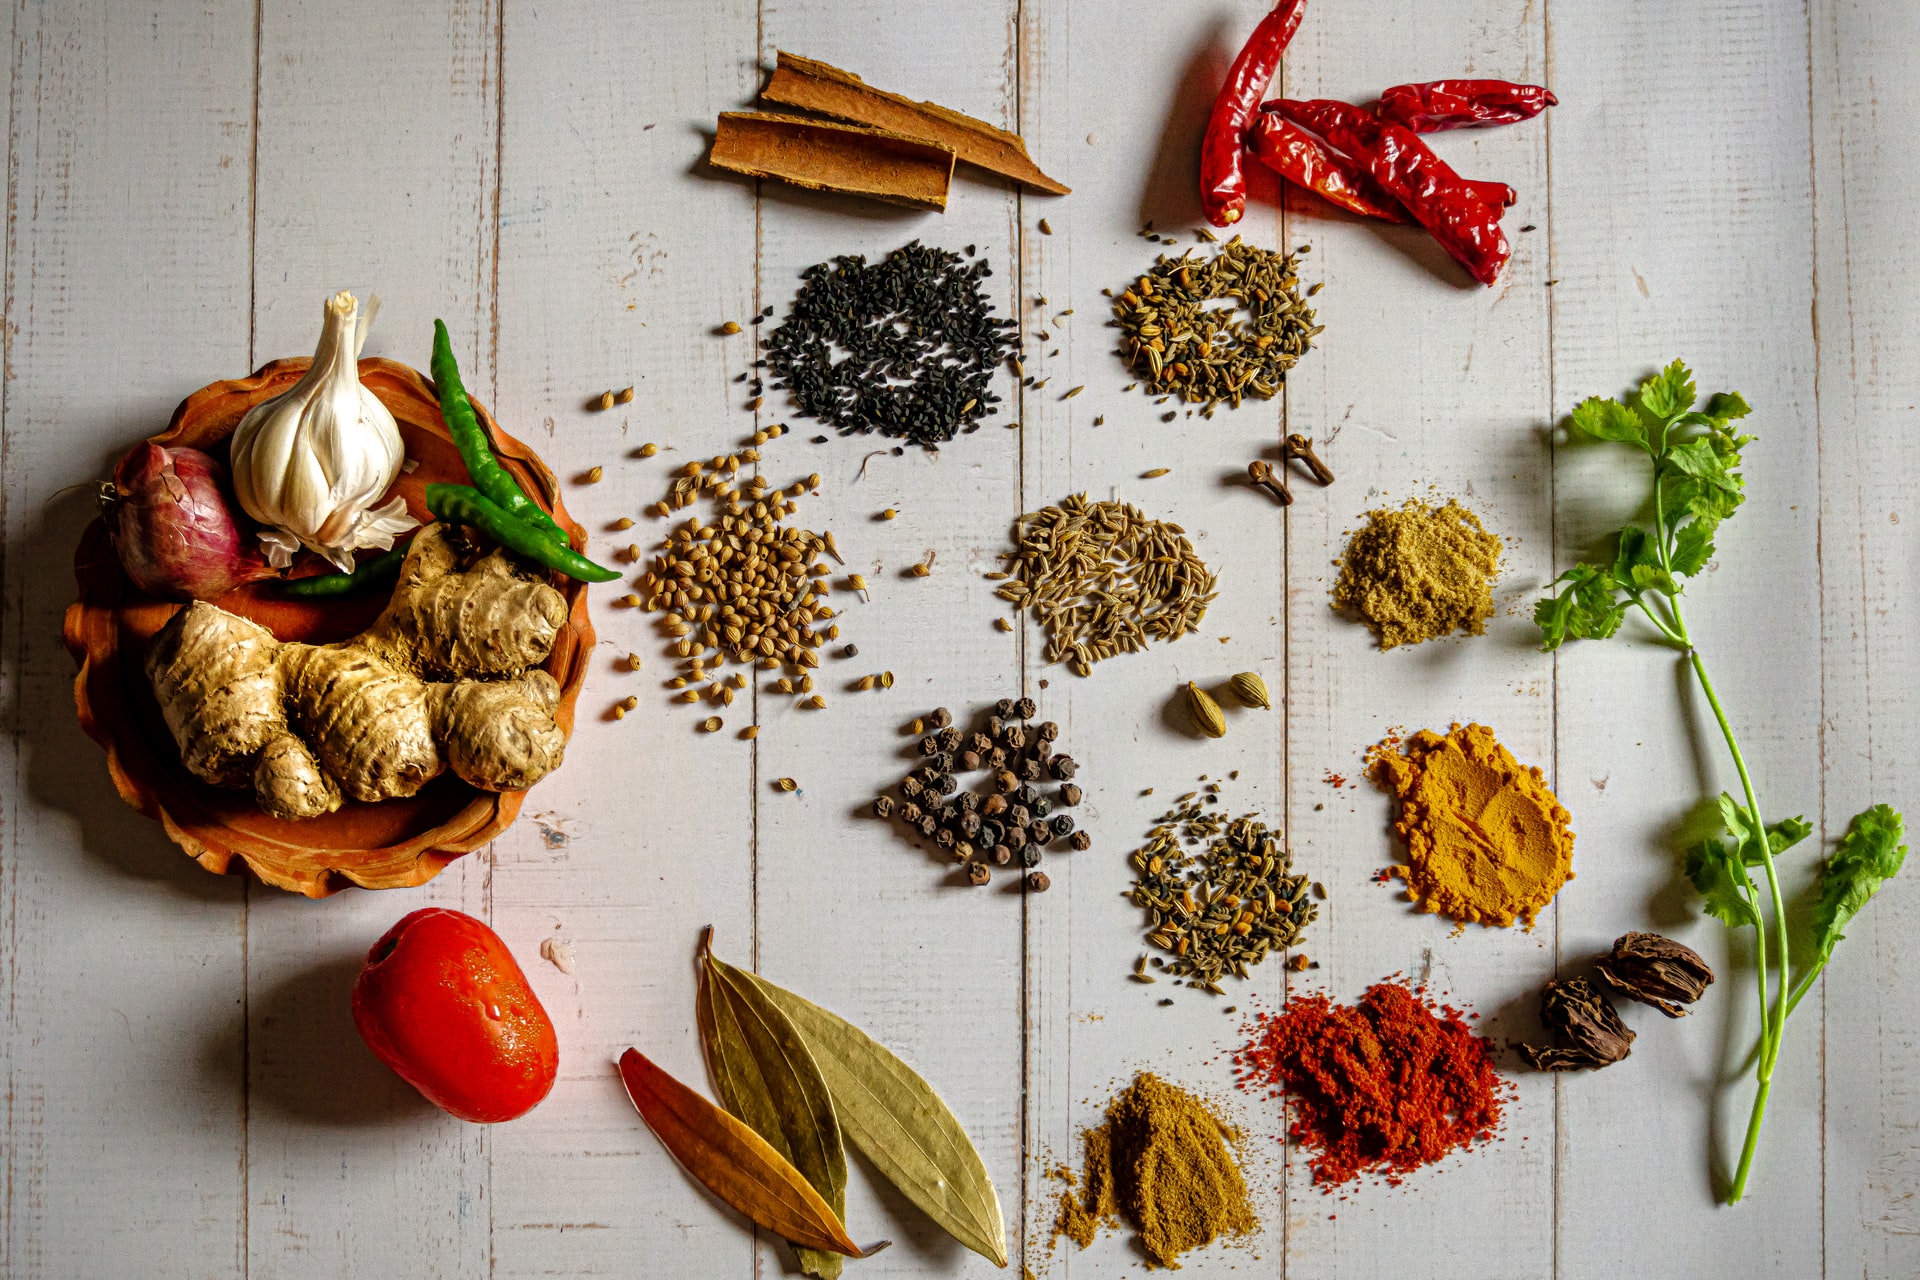 Adding herbs and spices to meals may help lower blood pressure | Penn State University